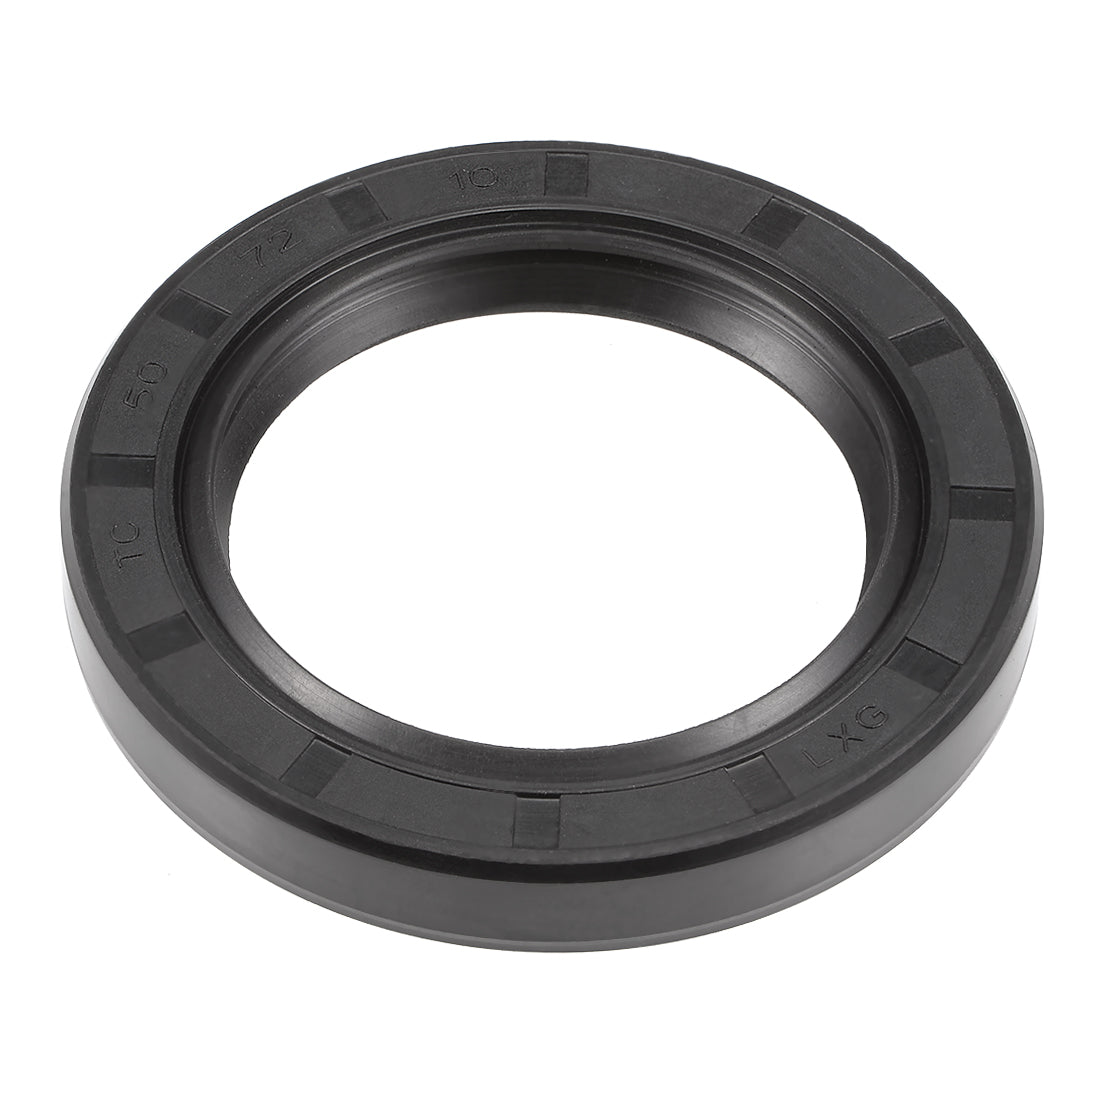 uxcell Uxcell Oil Seal, TC 50mm x 72mm x 10mm, Nitrile Rubber Cover Double Lip